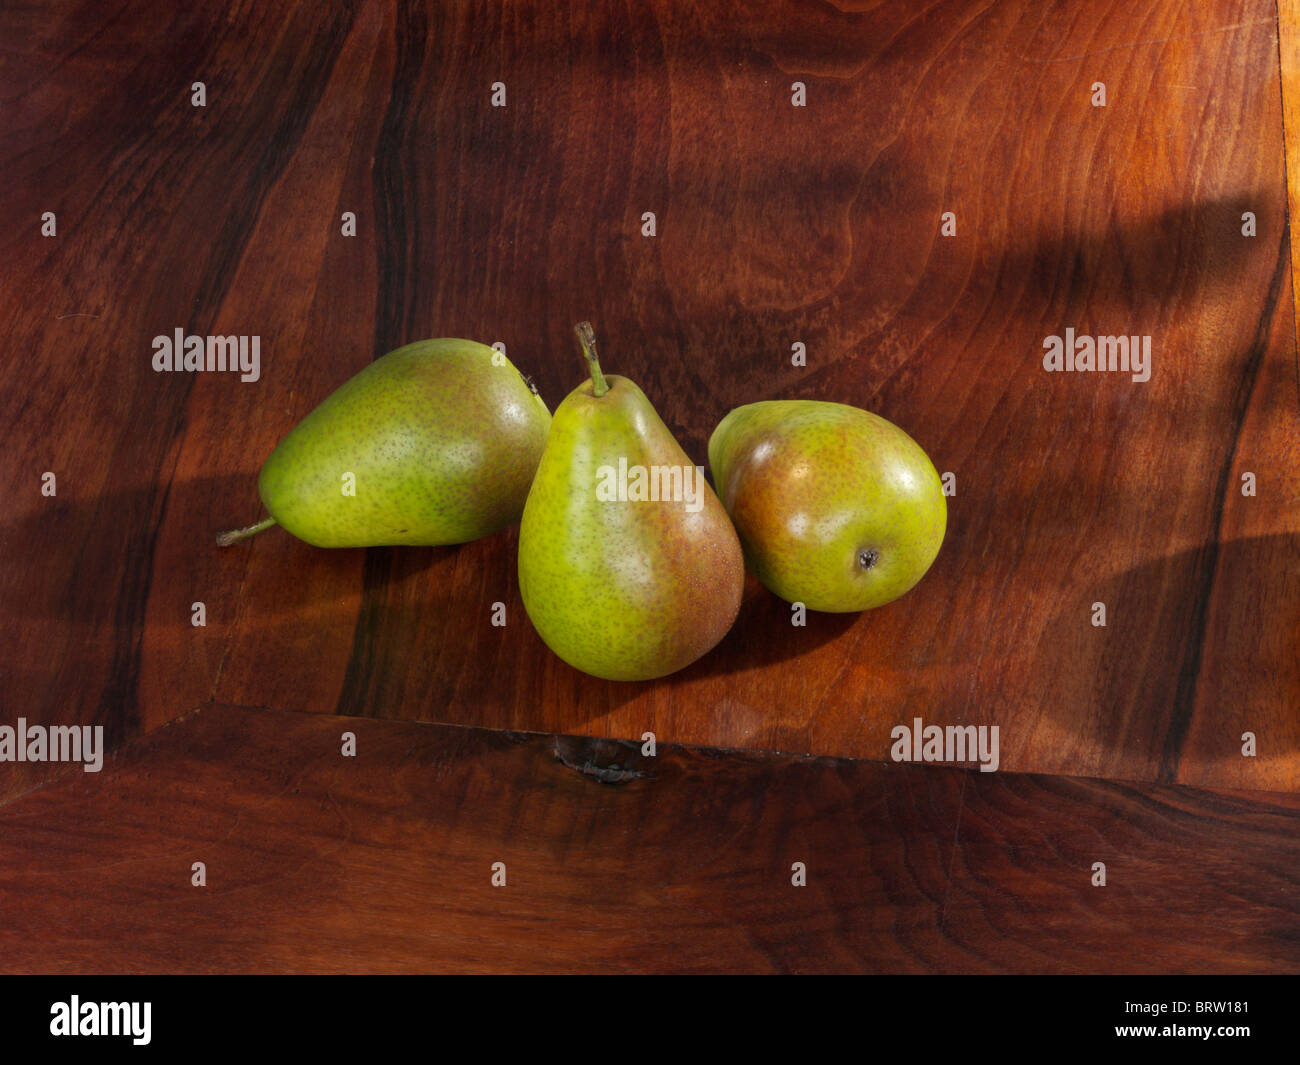 Three European Pears (Pyrus communis) on a wooden board, Gute Luise cultivar Stock Photo